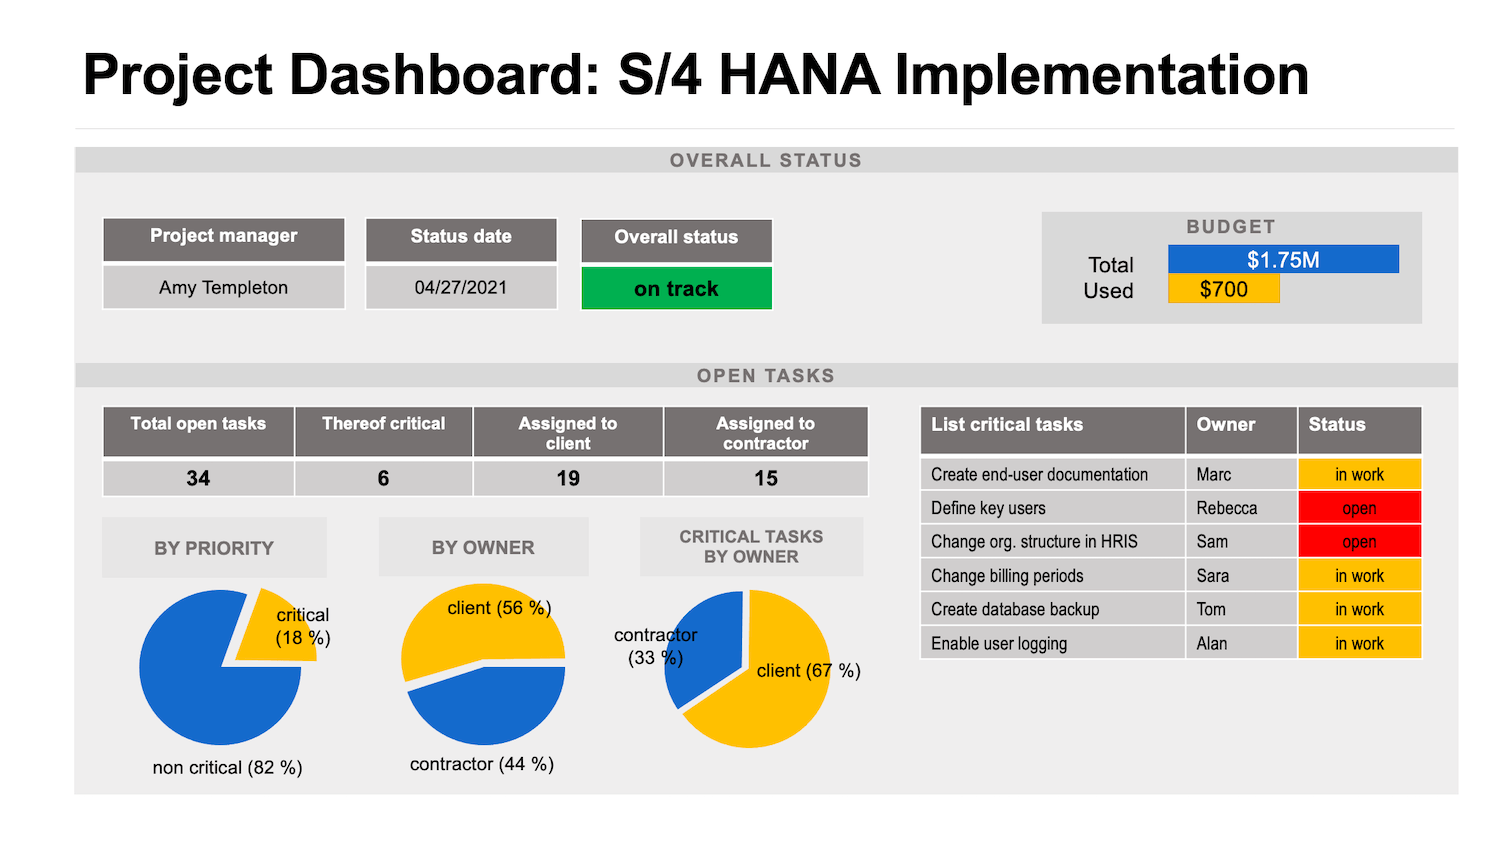 Project dashboard used for reporting of open issues